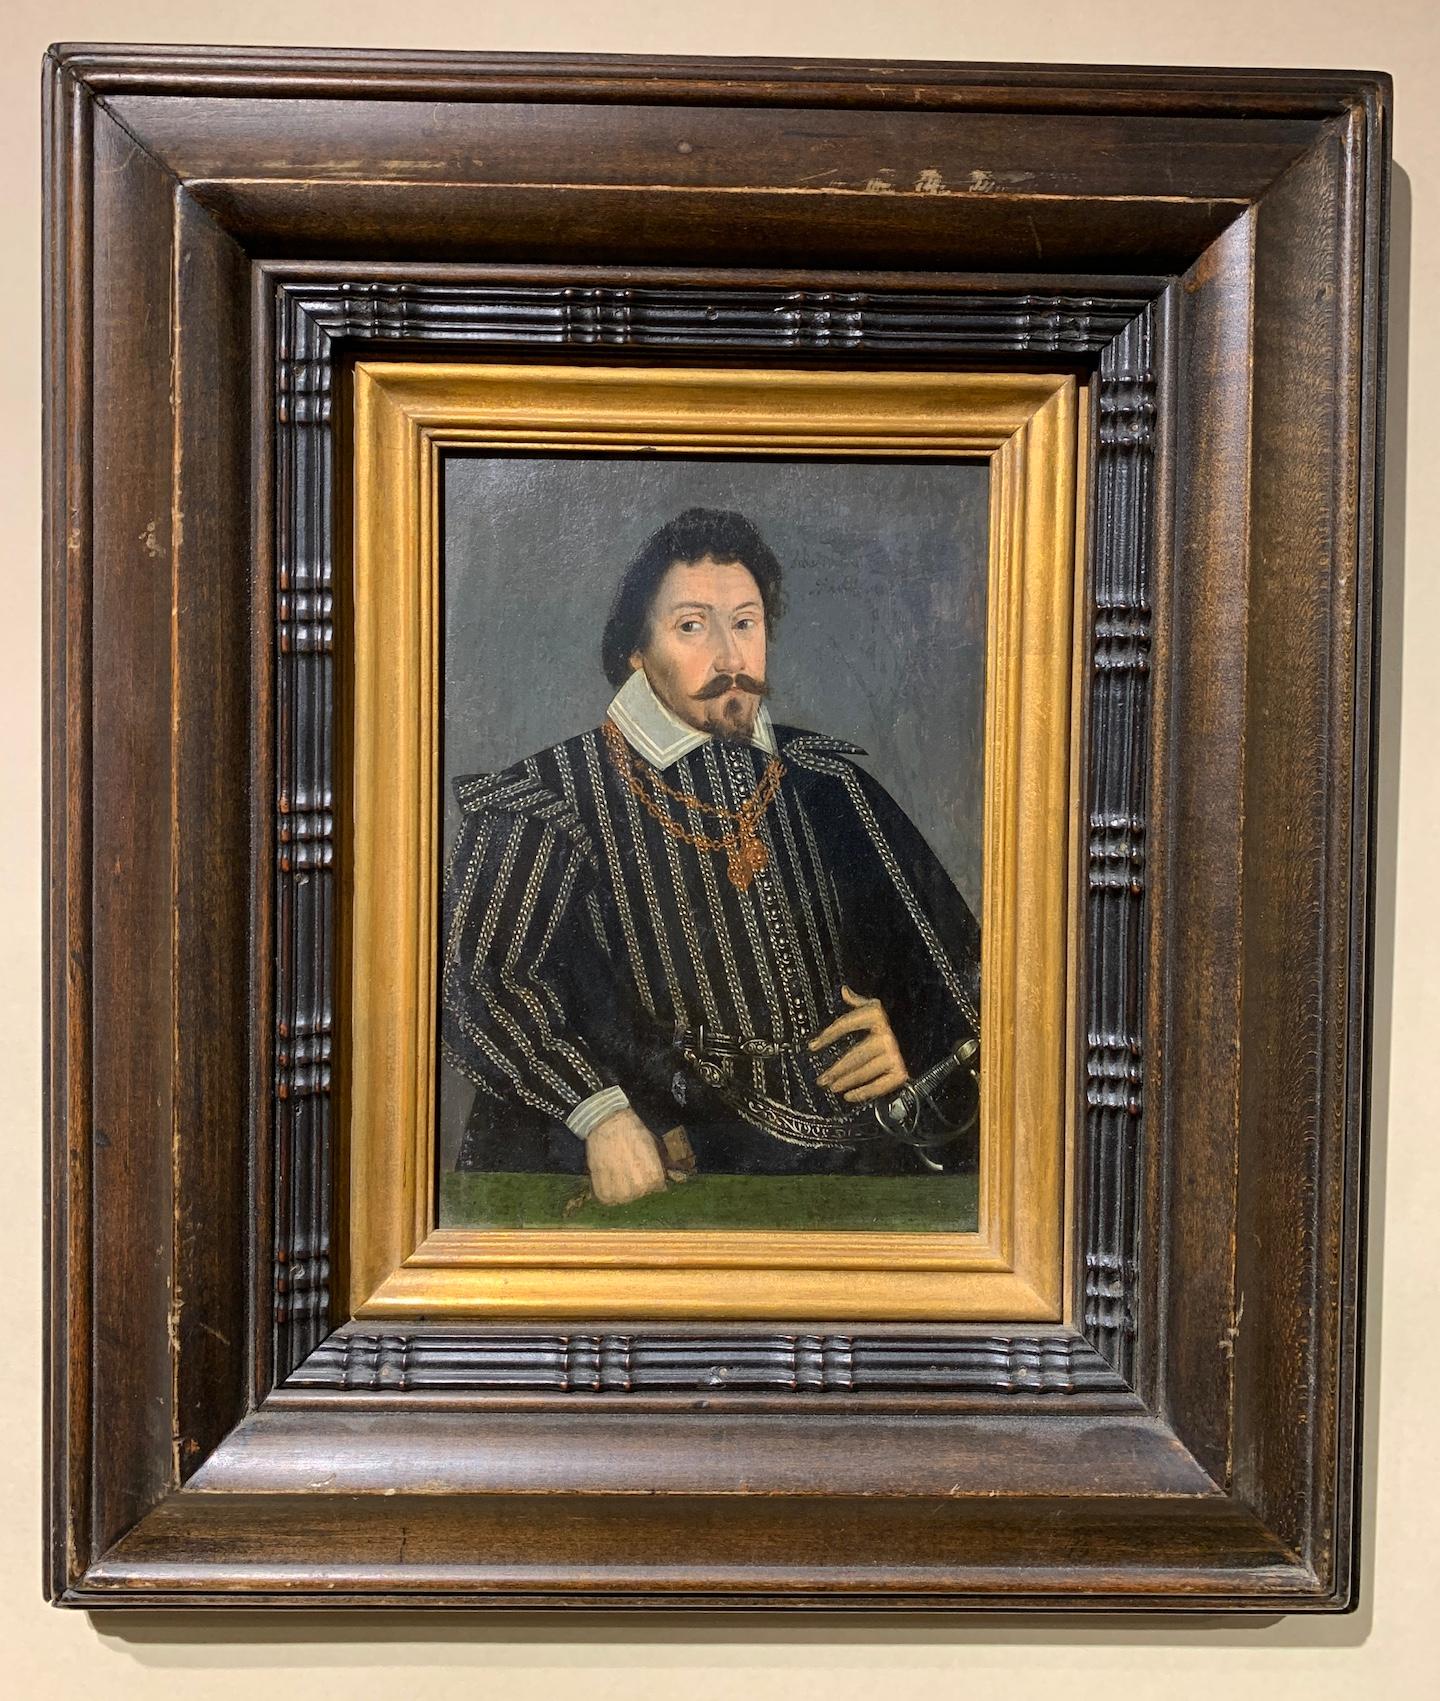 English 17th century Figurative Painting - Early 17th century Portrait of a Nobleman, with sword, on a wood panel